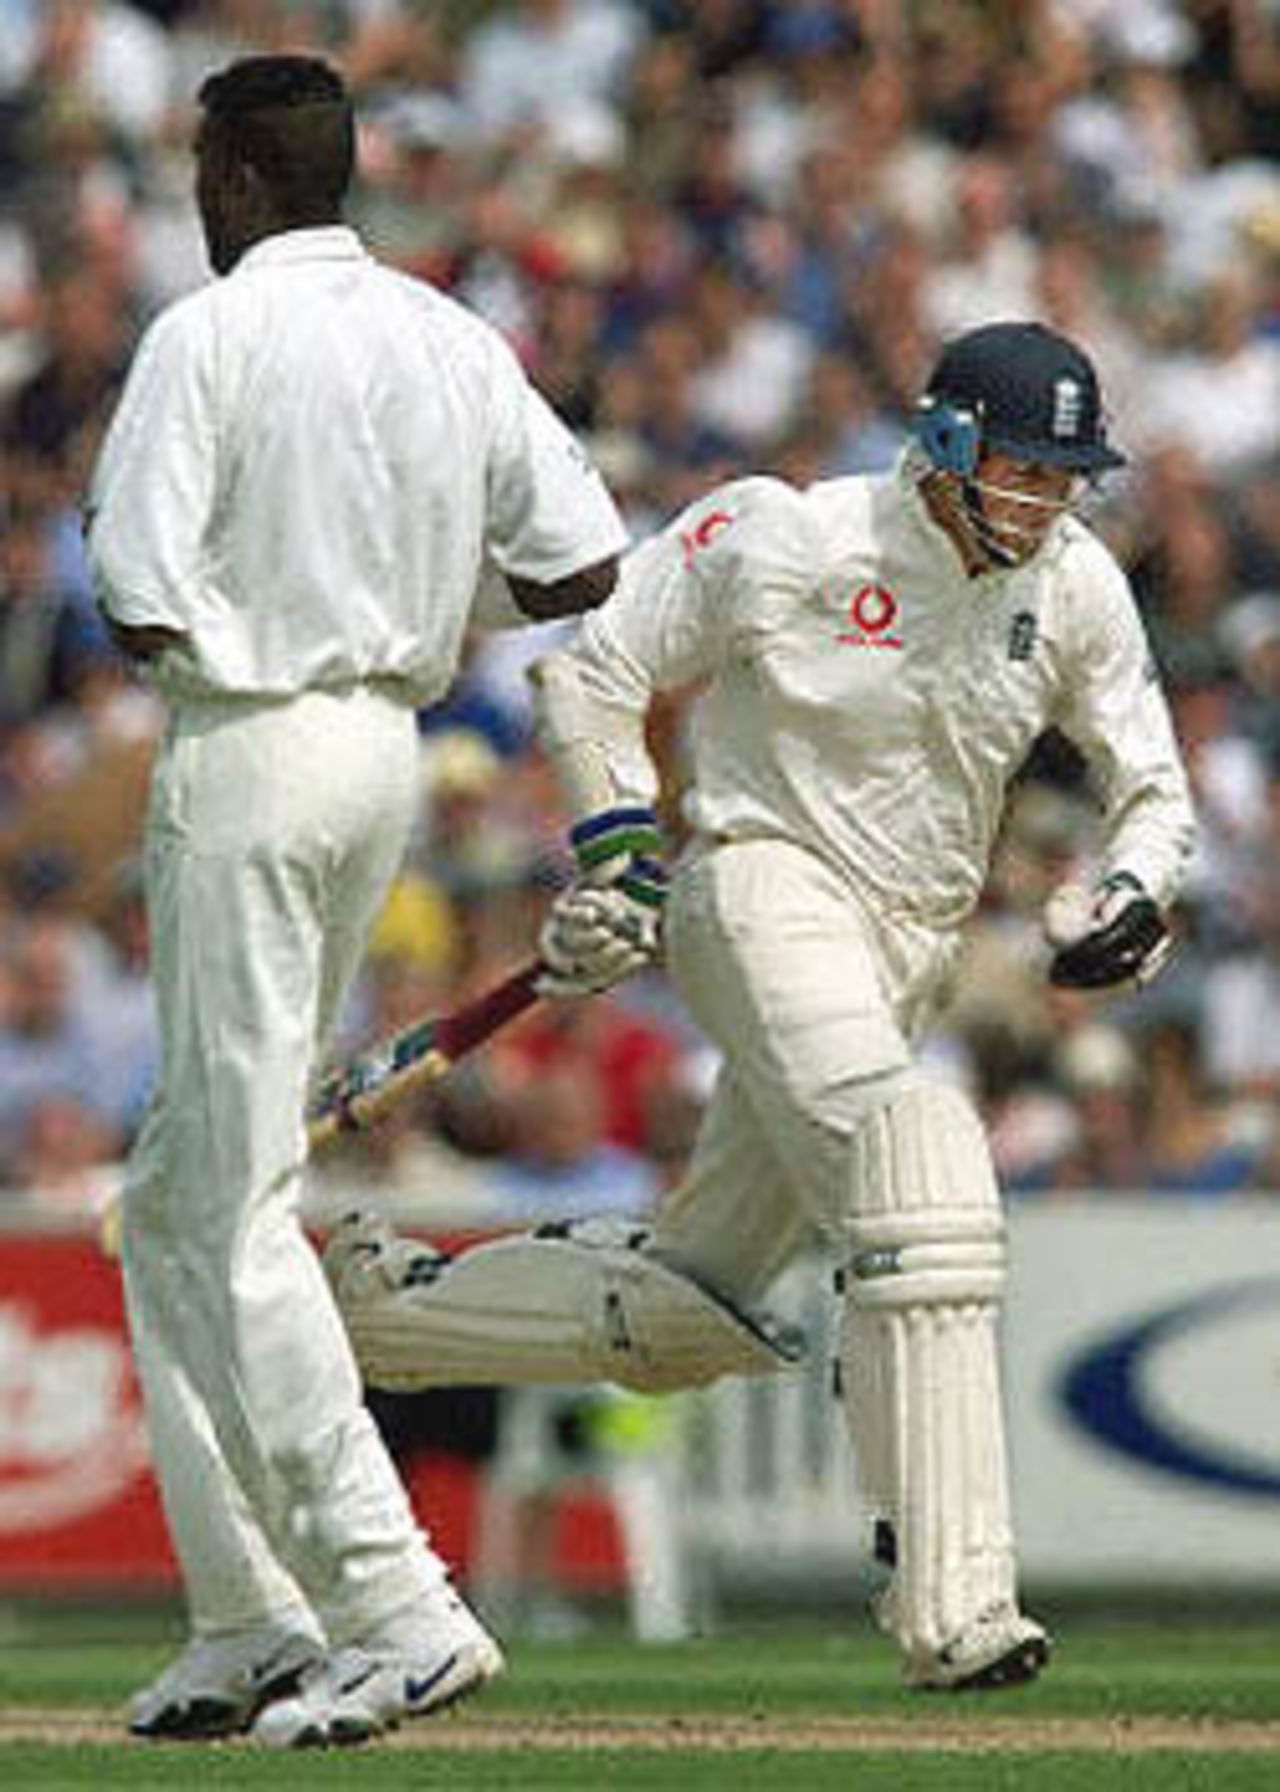 England's opening batsman Marcus Trescothick (R), runs past Curtly Ambrose of the West Indies during the first session of the Fifth Test against England at the Oval in London. Trescothick made 30 runs before lunch and England didn't lose a wicket. The Wisden Trophy, 2000, 5th Test, England v West Indies, Kennington Oval, London, 31Aug-04Sep 2000 (Day 1).